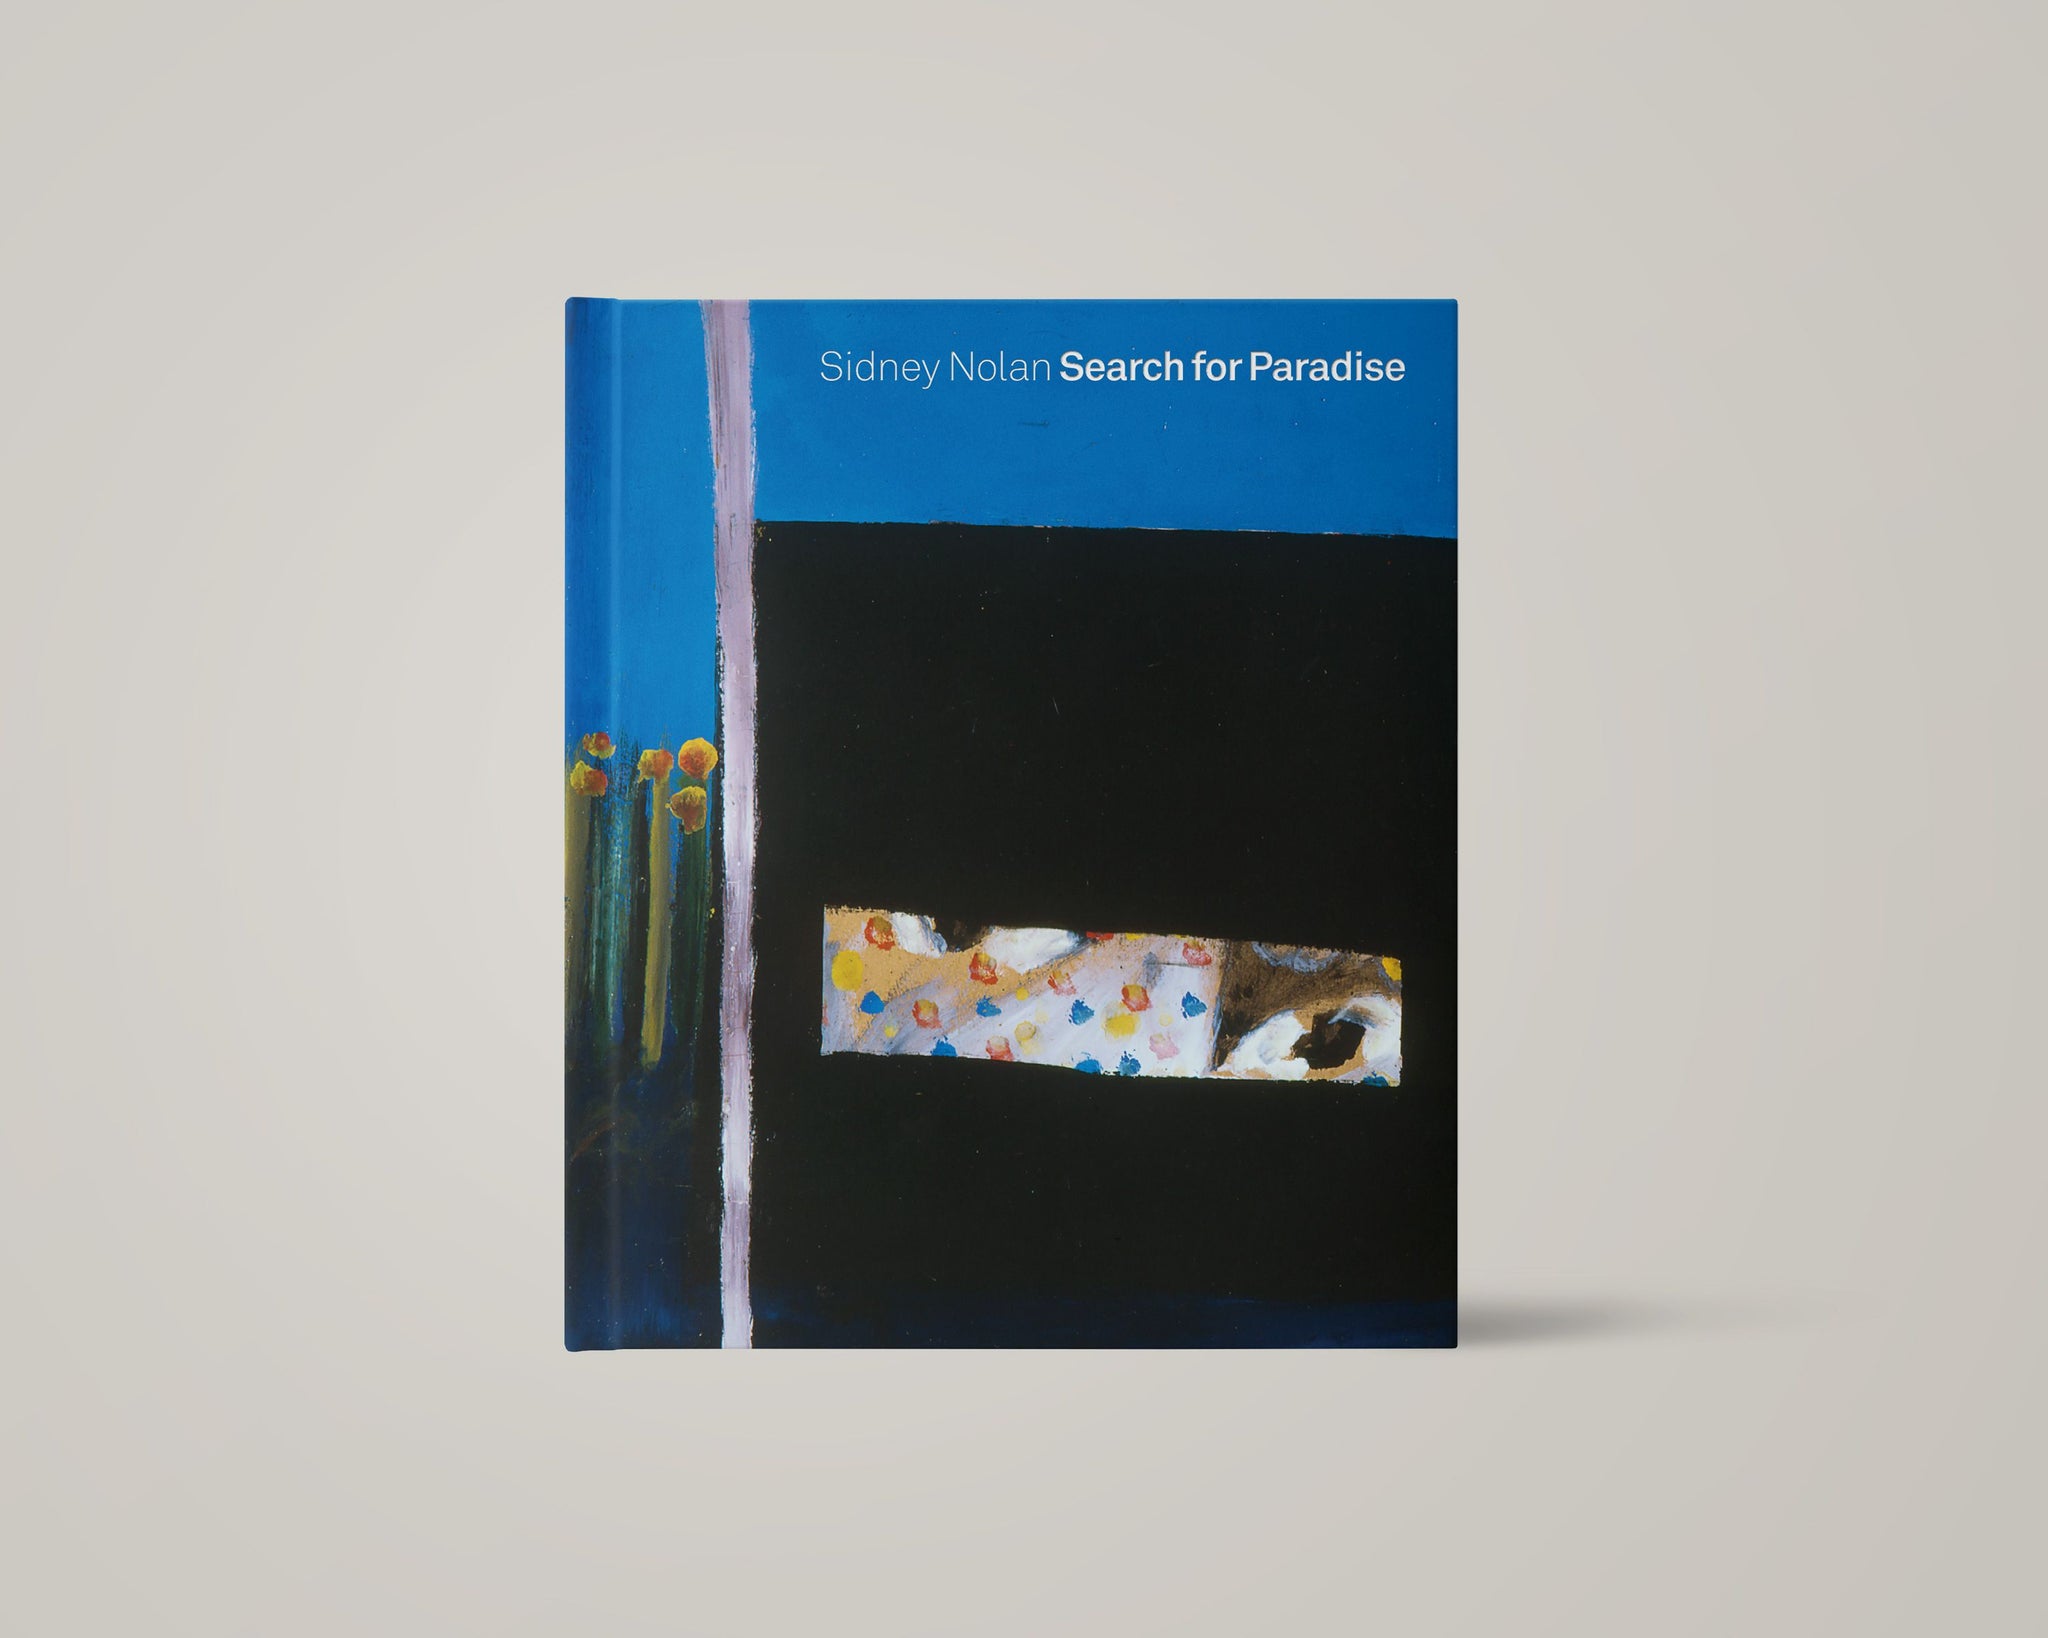 Sidney Nolan <br> Search for Paradise catalogue